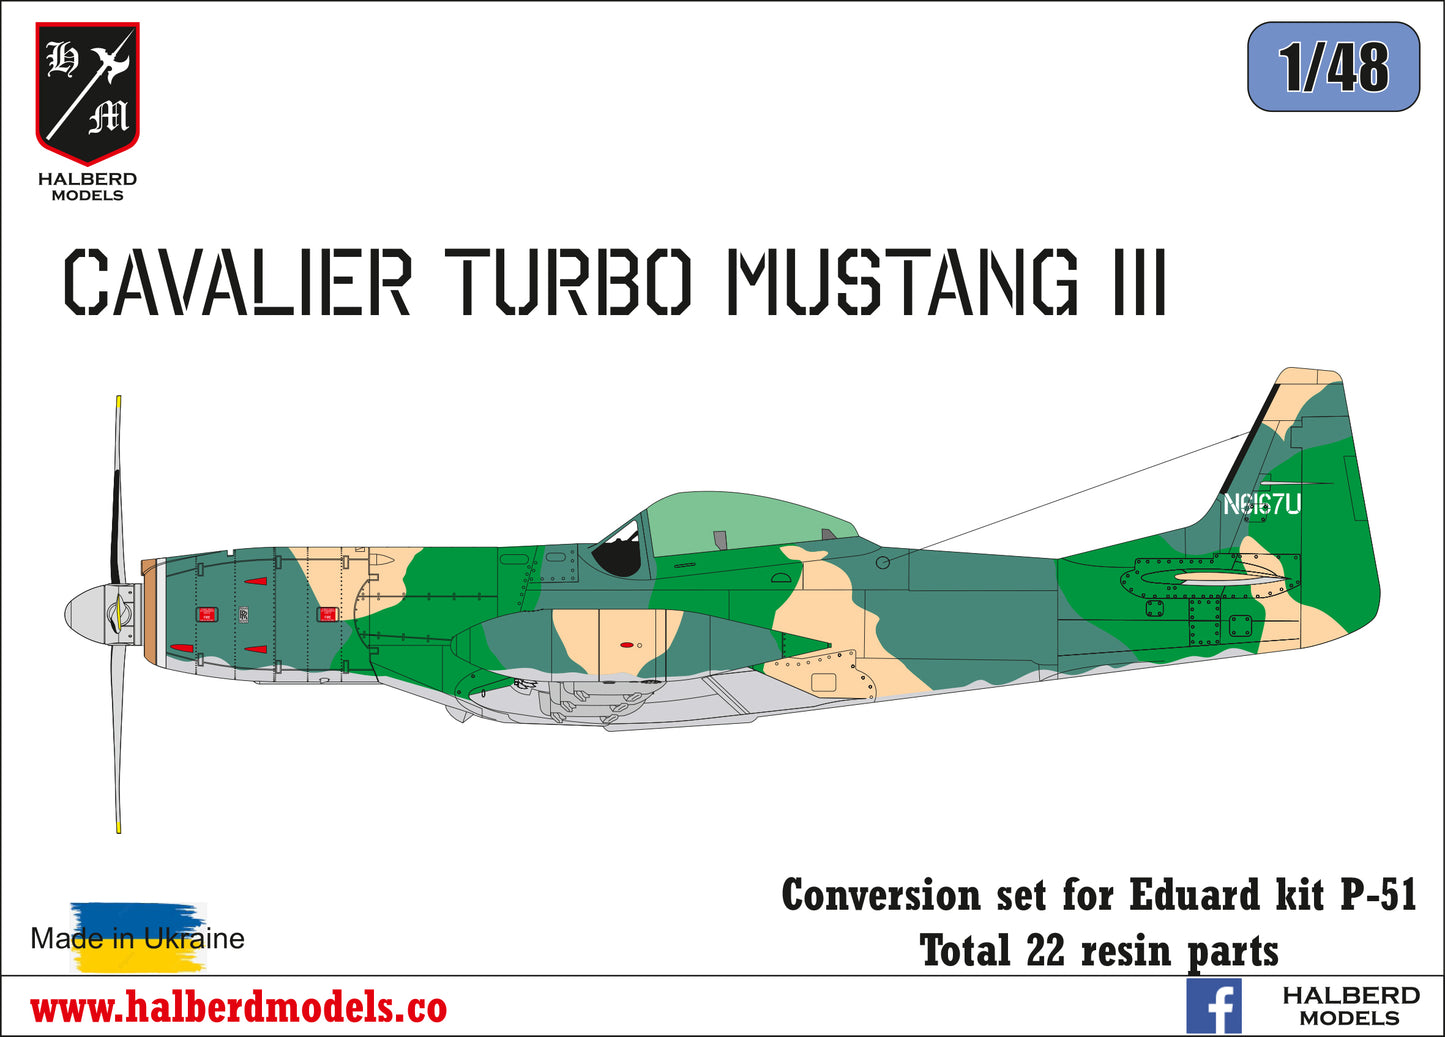 Cavalier Turbo Mustang III conversion set for Eduard kit P-51D 1/48 scale